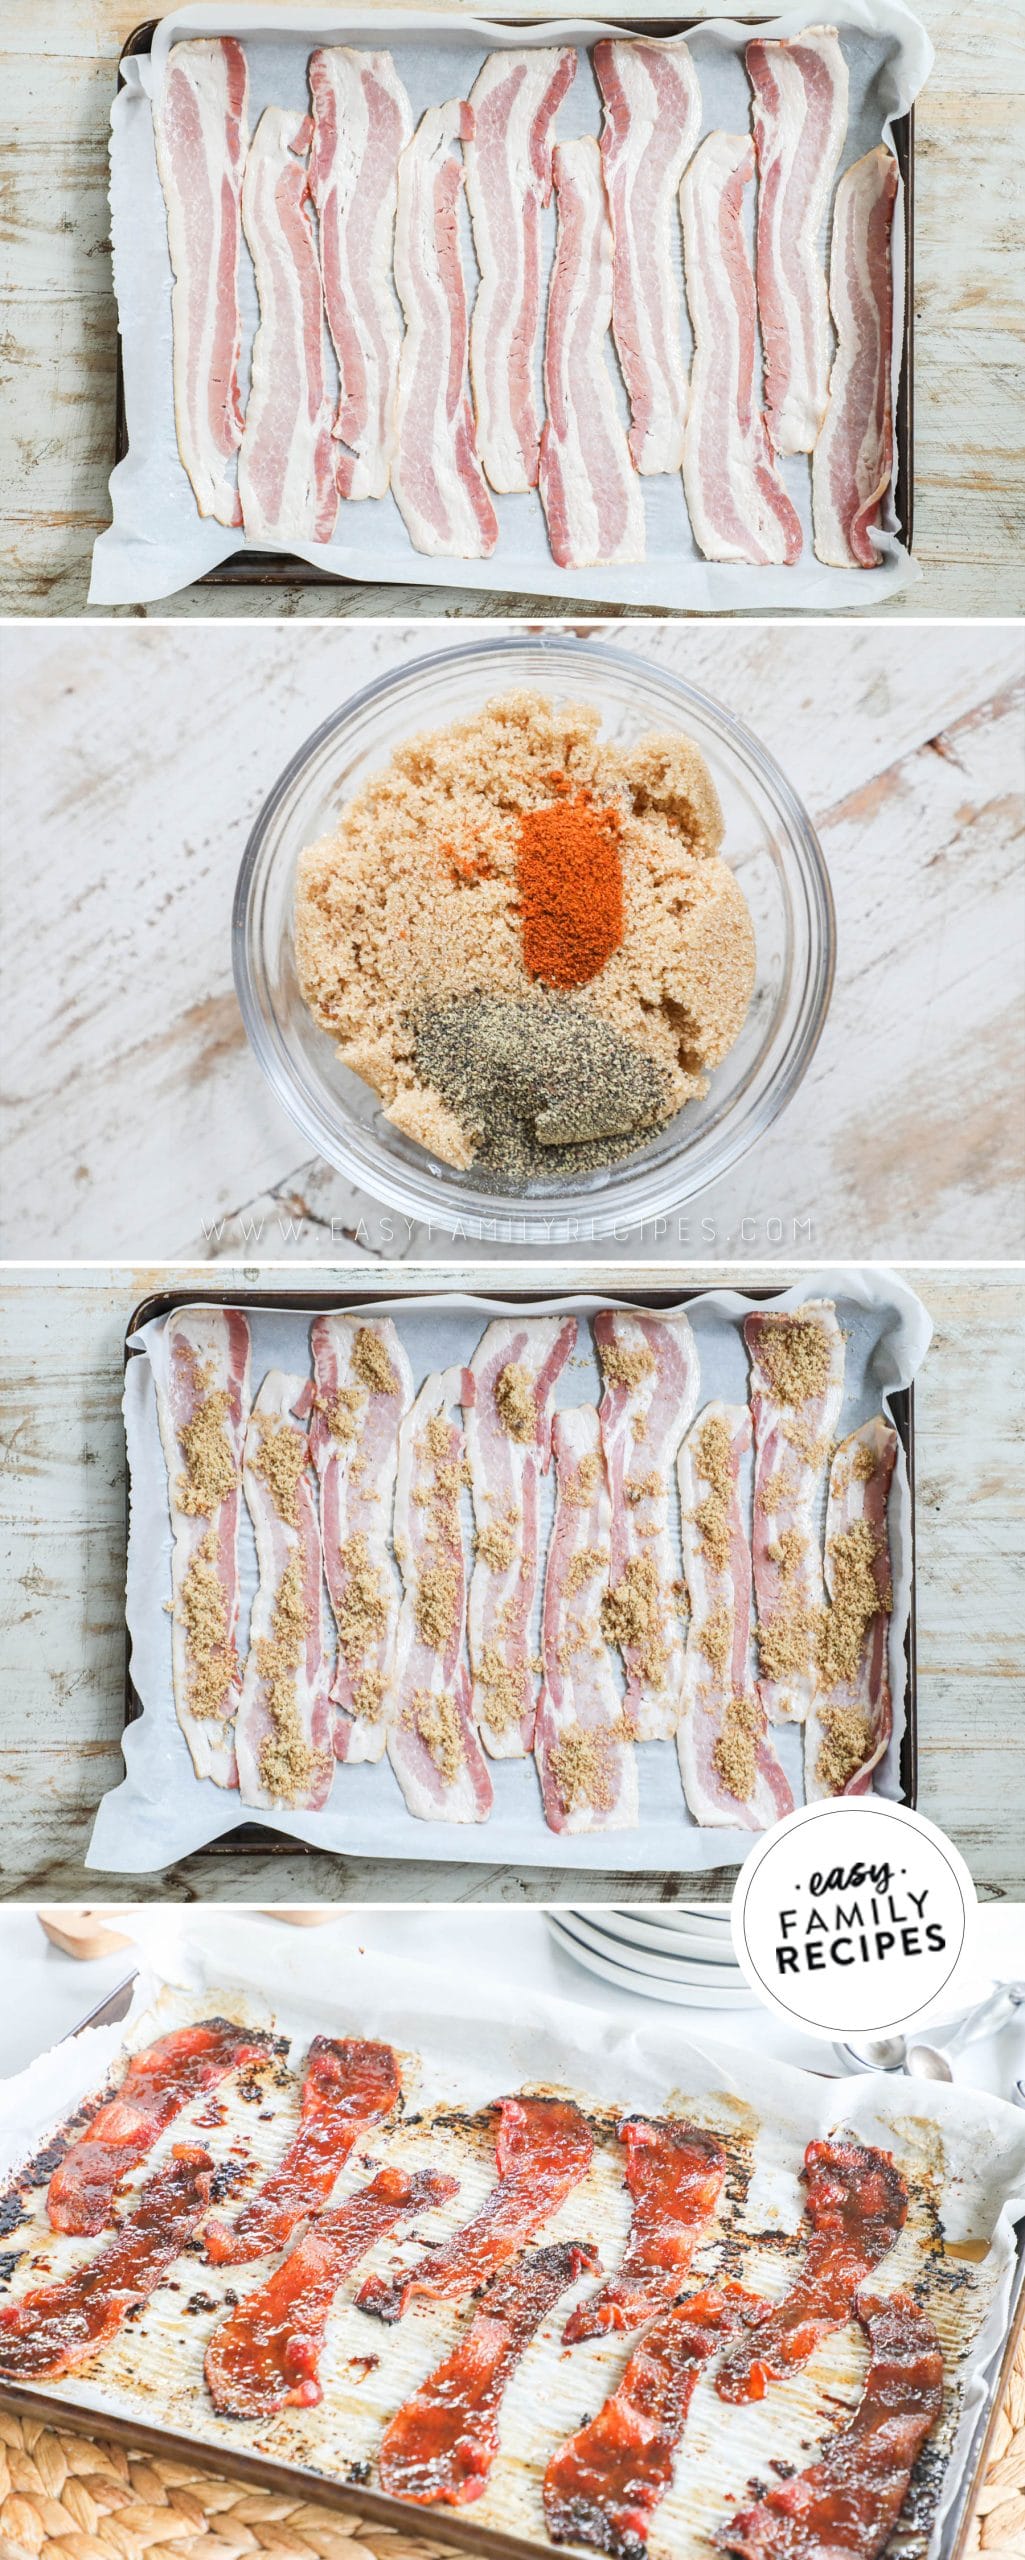 Process photos for how to make million dollar bacon - 1. Line sheet with parchment paper and lay bacon in a single layer. 2. Mix together sugar and spices. 3. Spread sugar mixture over bacon and pat in. 4. Bake for 25-30 min or until bacon reaches desired crispiness.